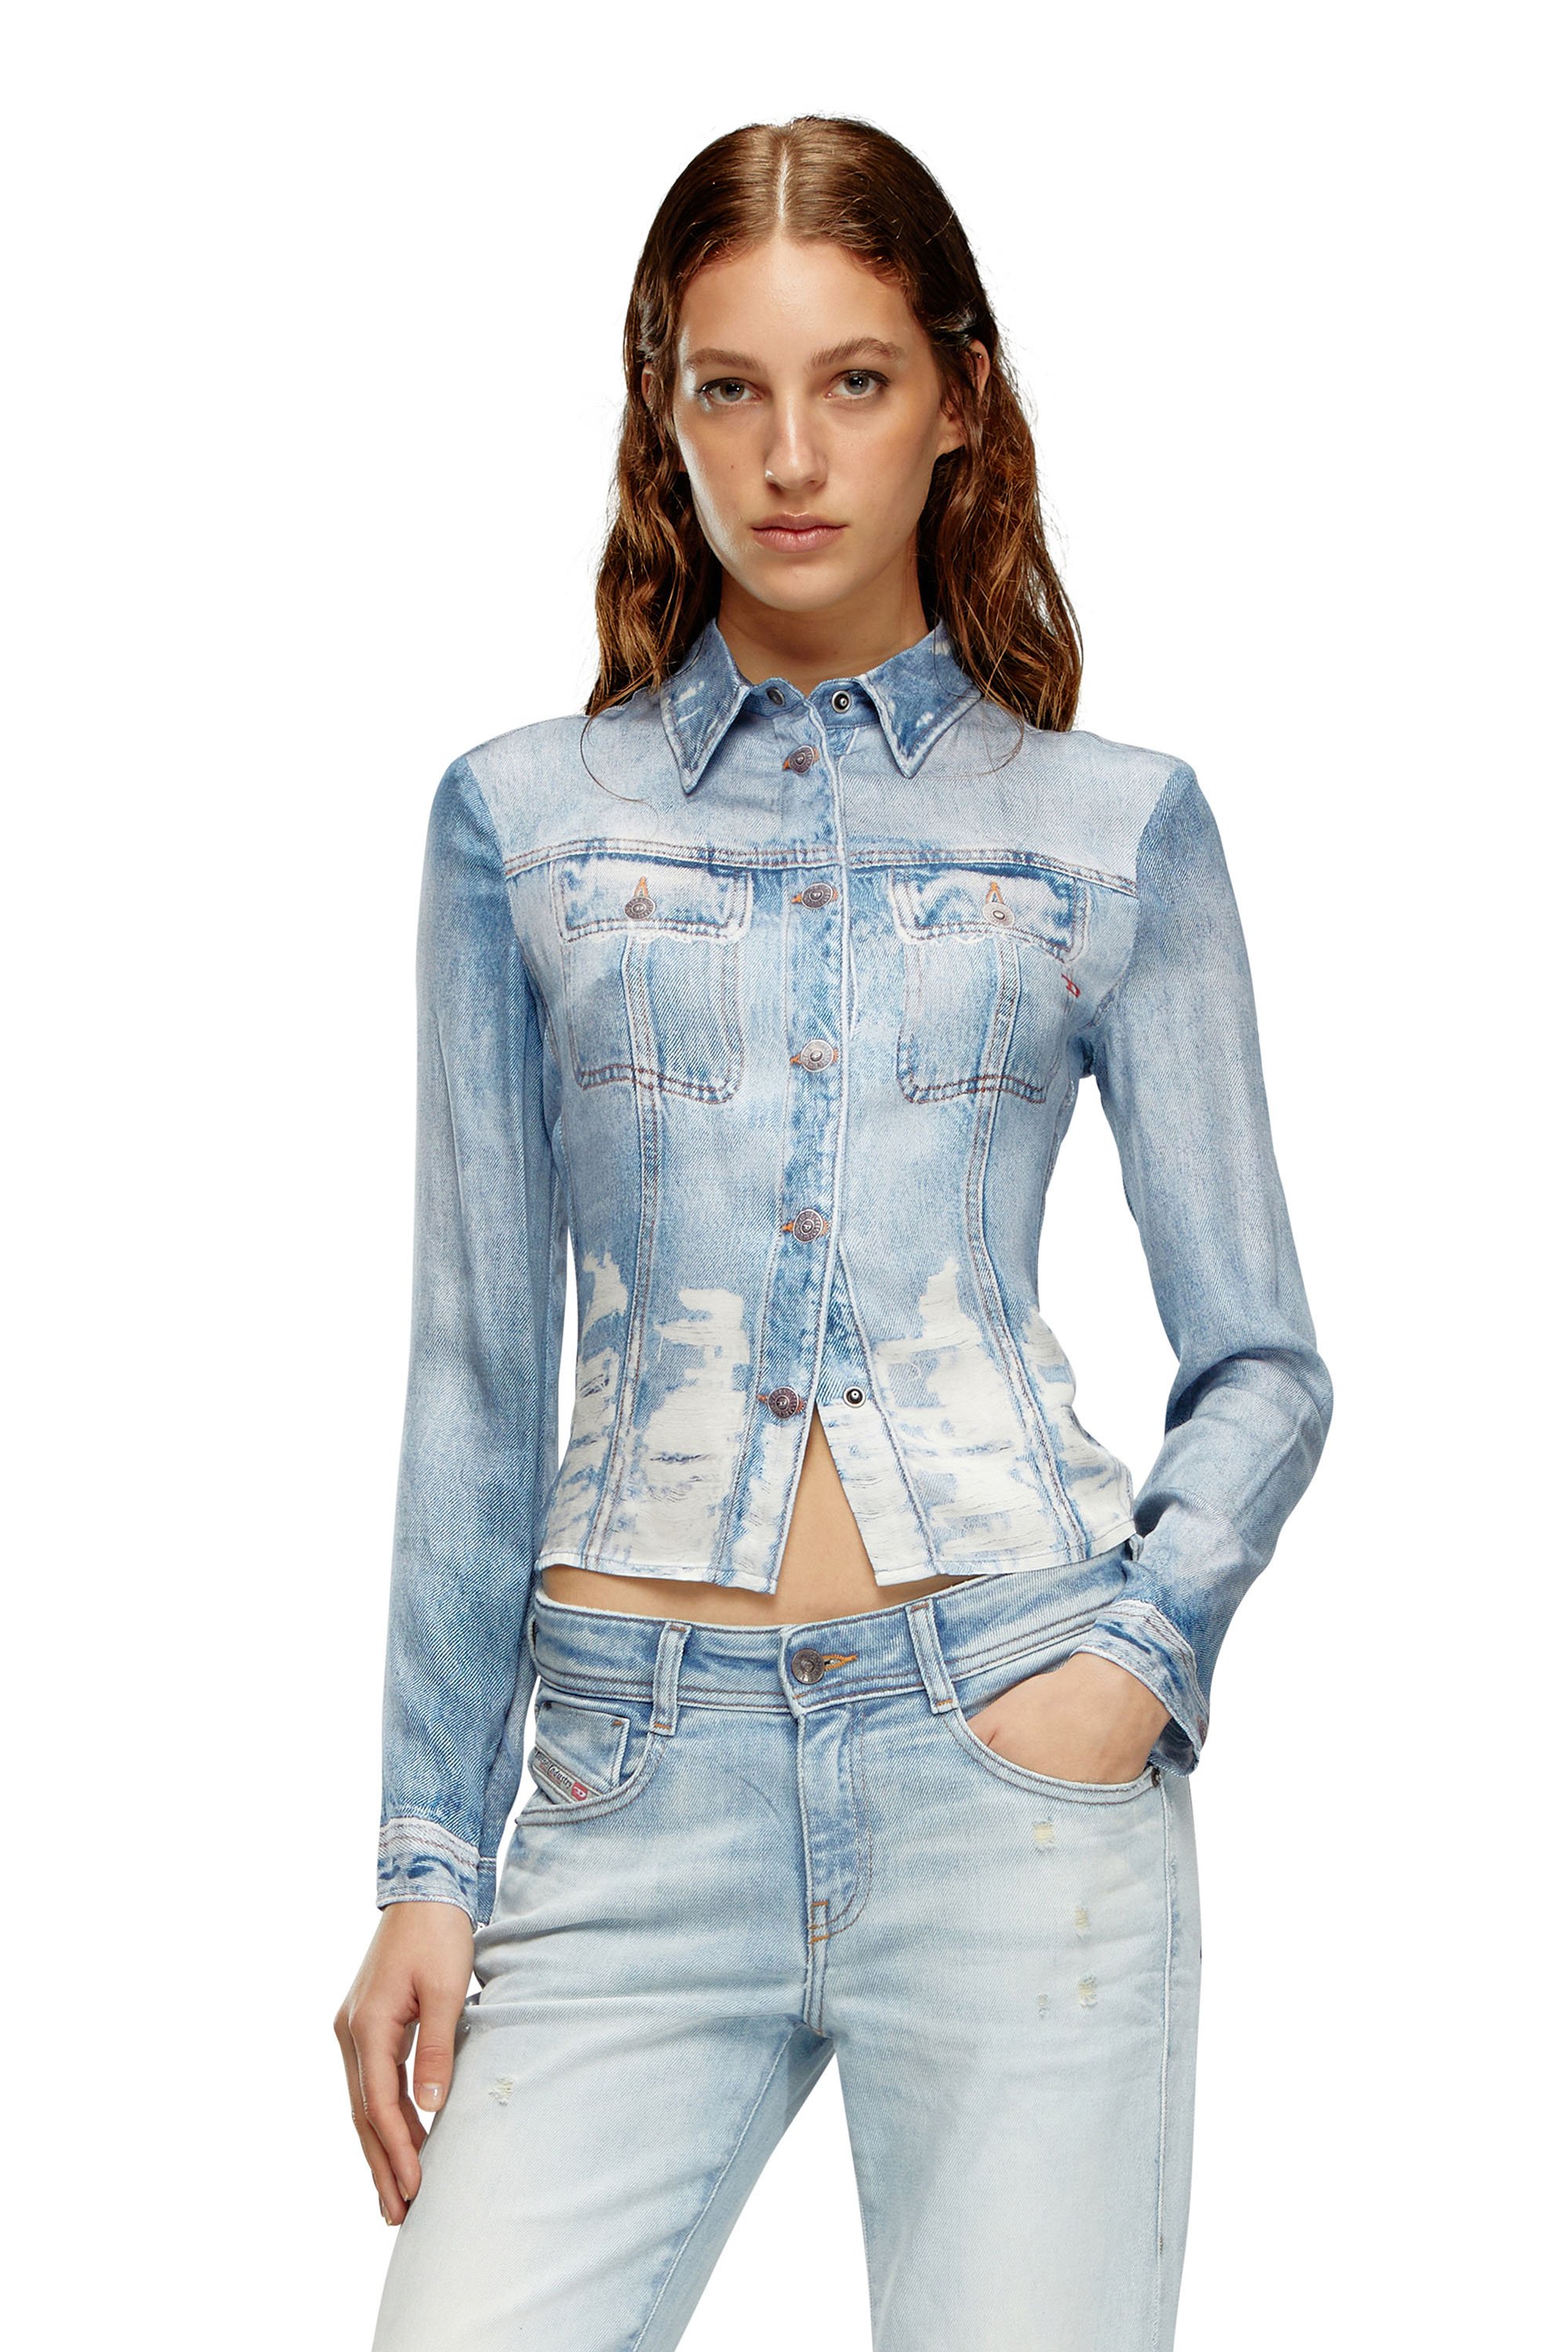 Women's Shirts: in Jeans, Oversize, with Pattern